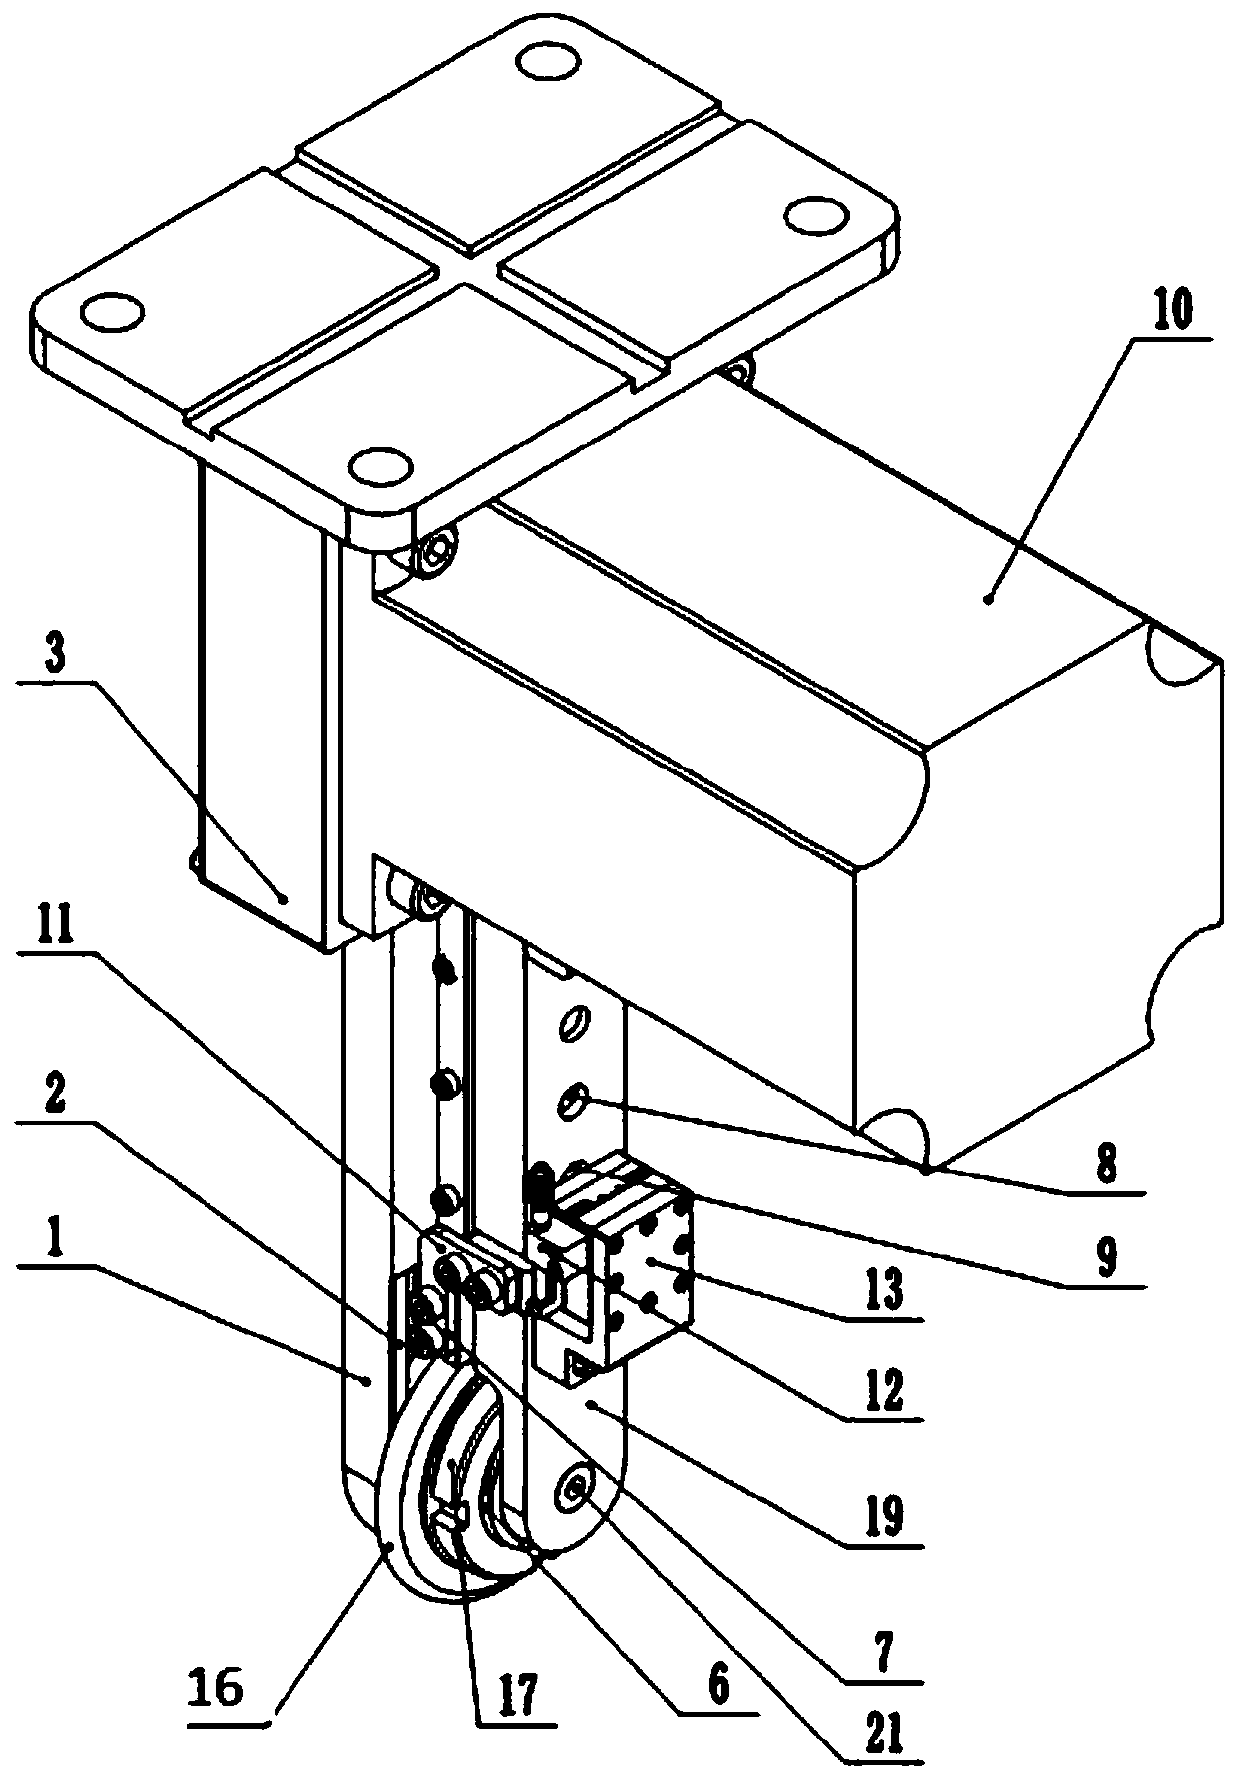 A grinding head with online electrolytic dressing function